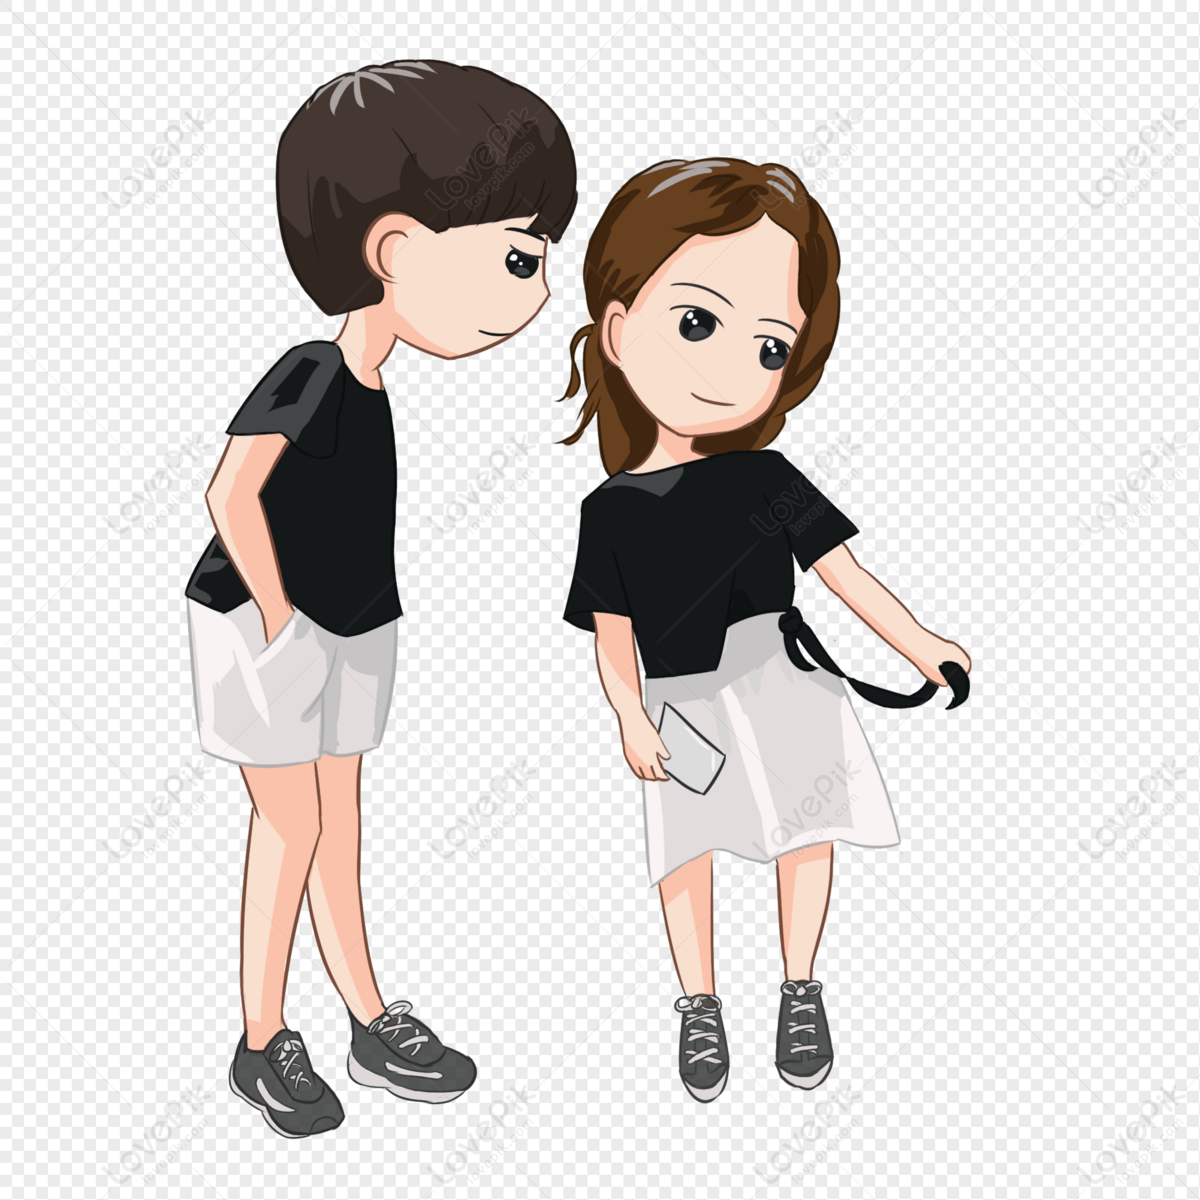 Cute Cartoon Couple PNG Transparent Background And Clipart Image For Free  Download - Lovepik | 401432060